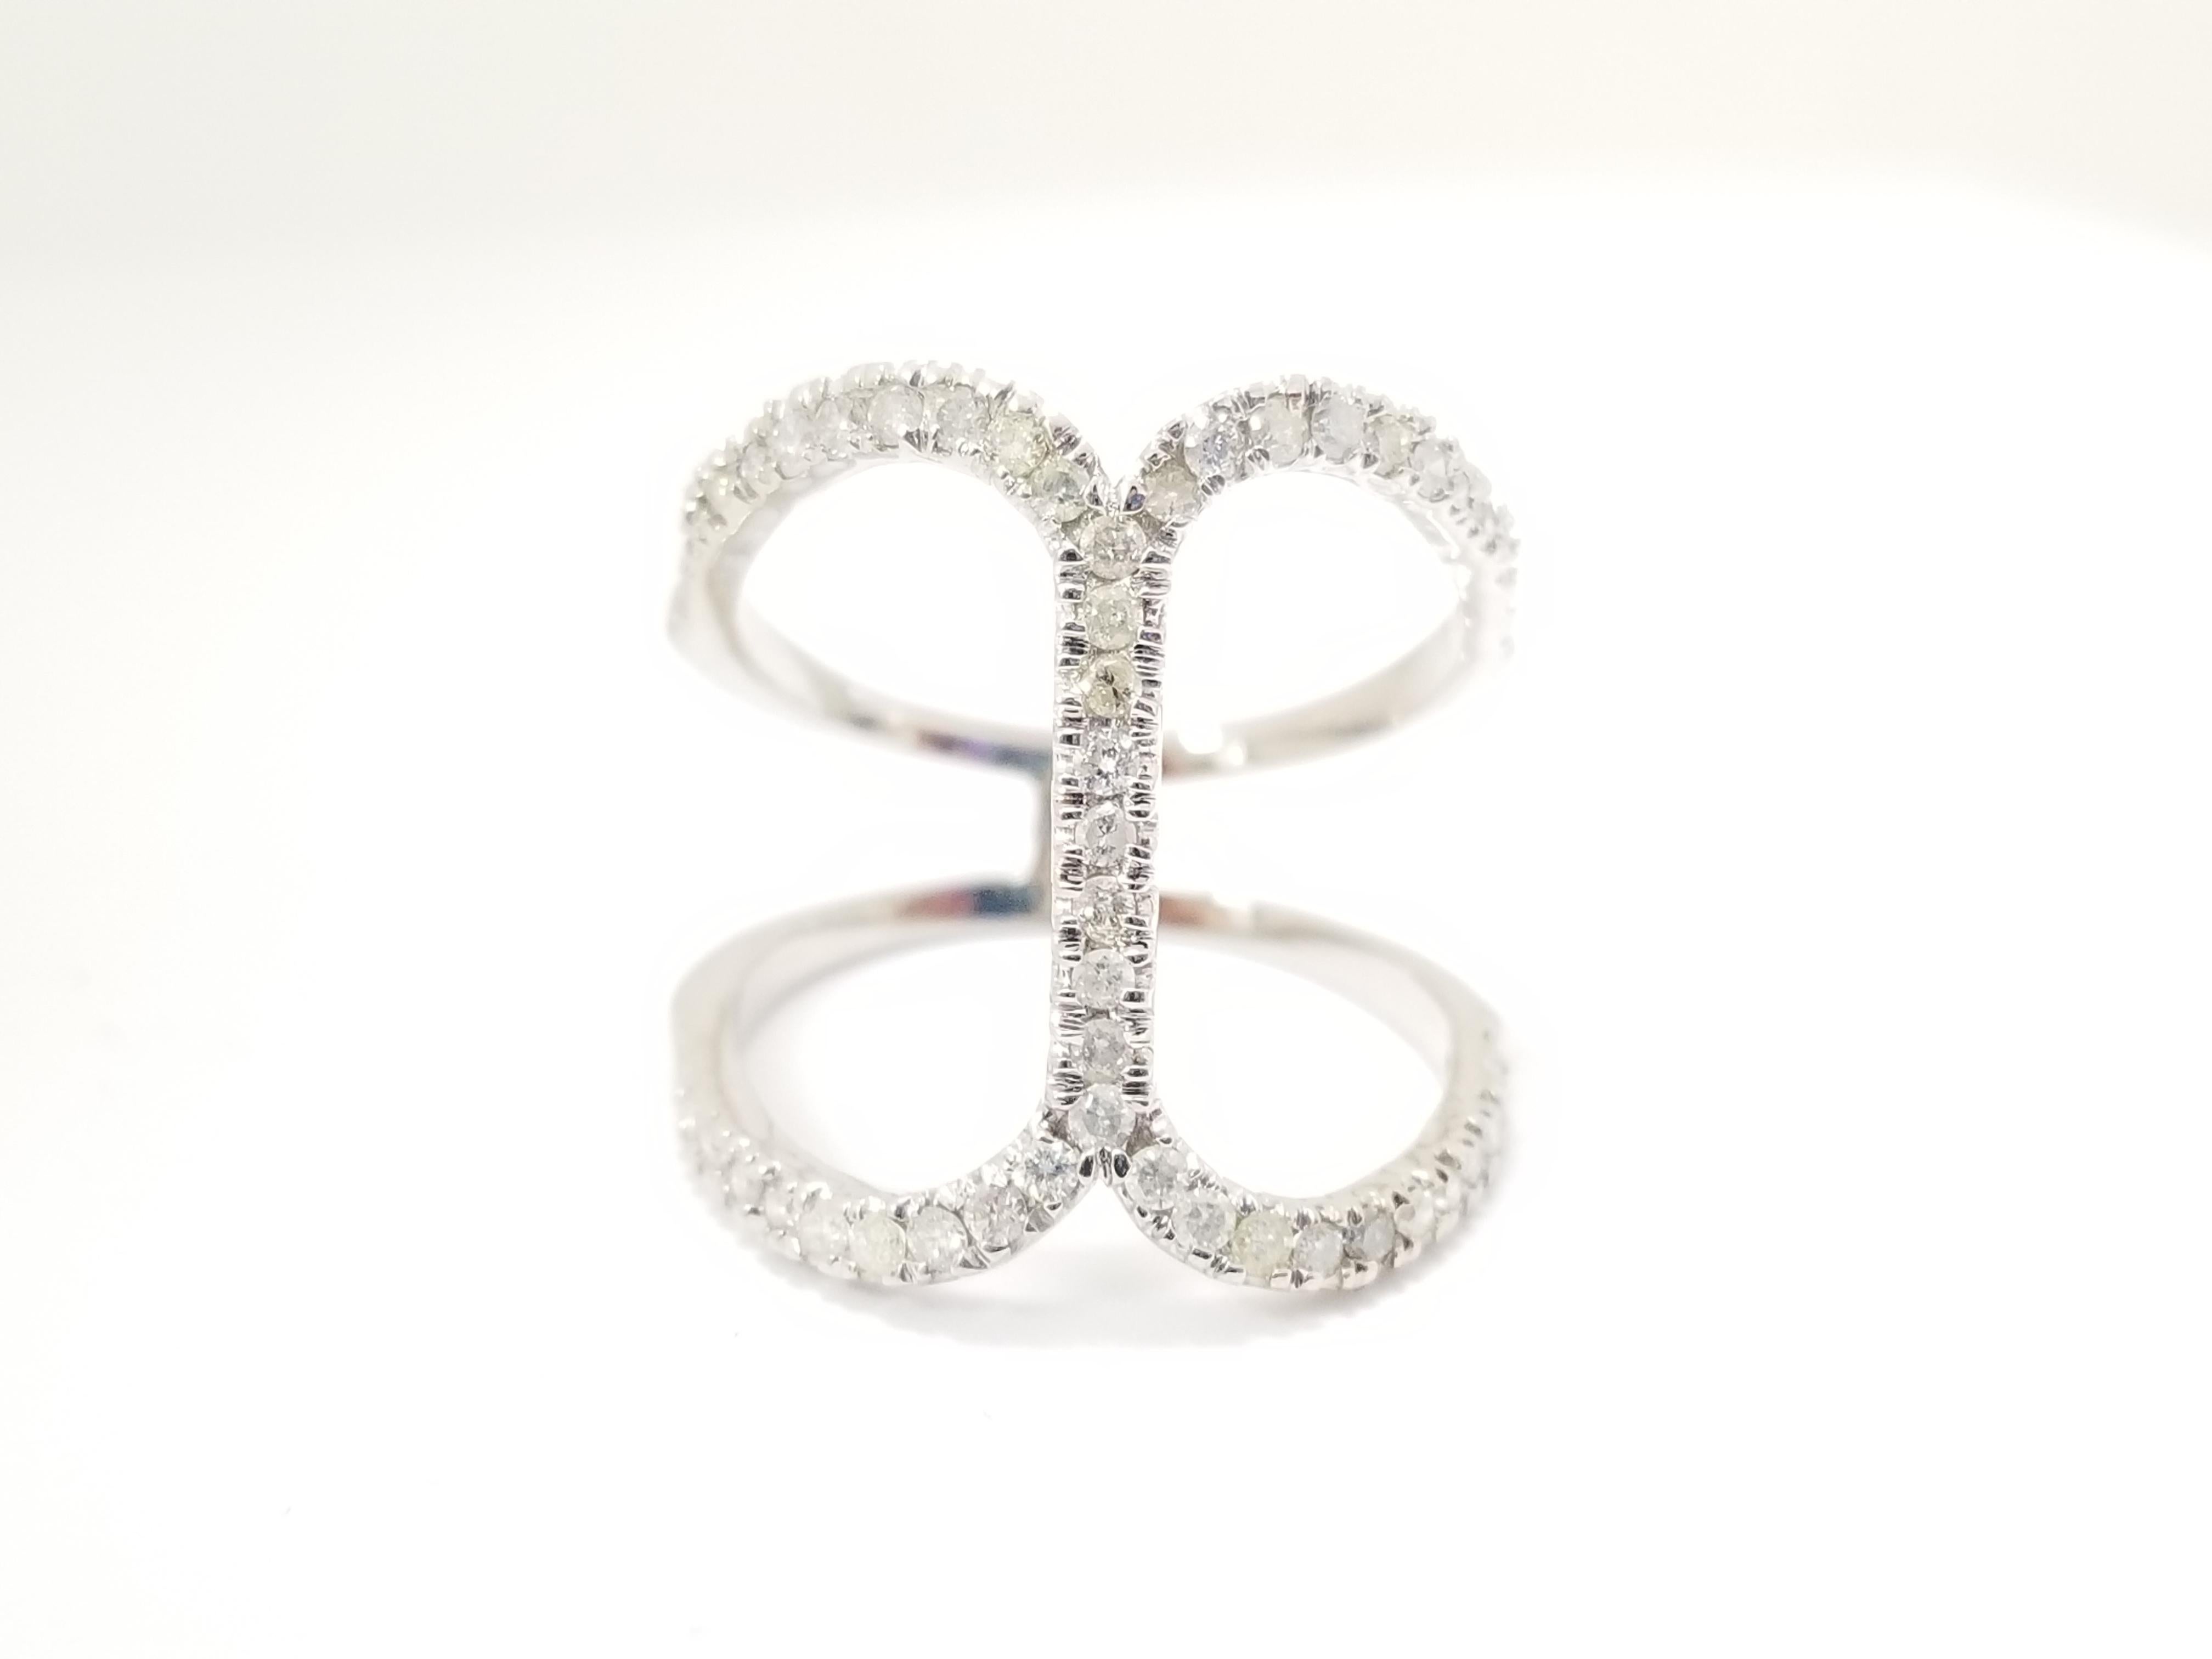 Brilliant prong-set round diamonds intersect each other in a cross design and look stunning. 
Crafted in 14k White gold, this ring exudes understated style and elegance.
Prong-Set Diamond Cross Ring 0.55 cttw
Average Color/Clarity I Color SI-I. Ring